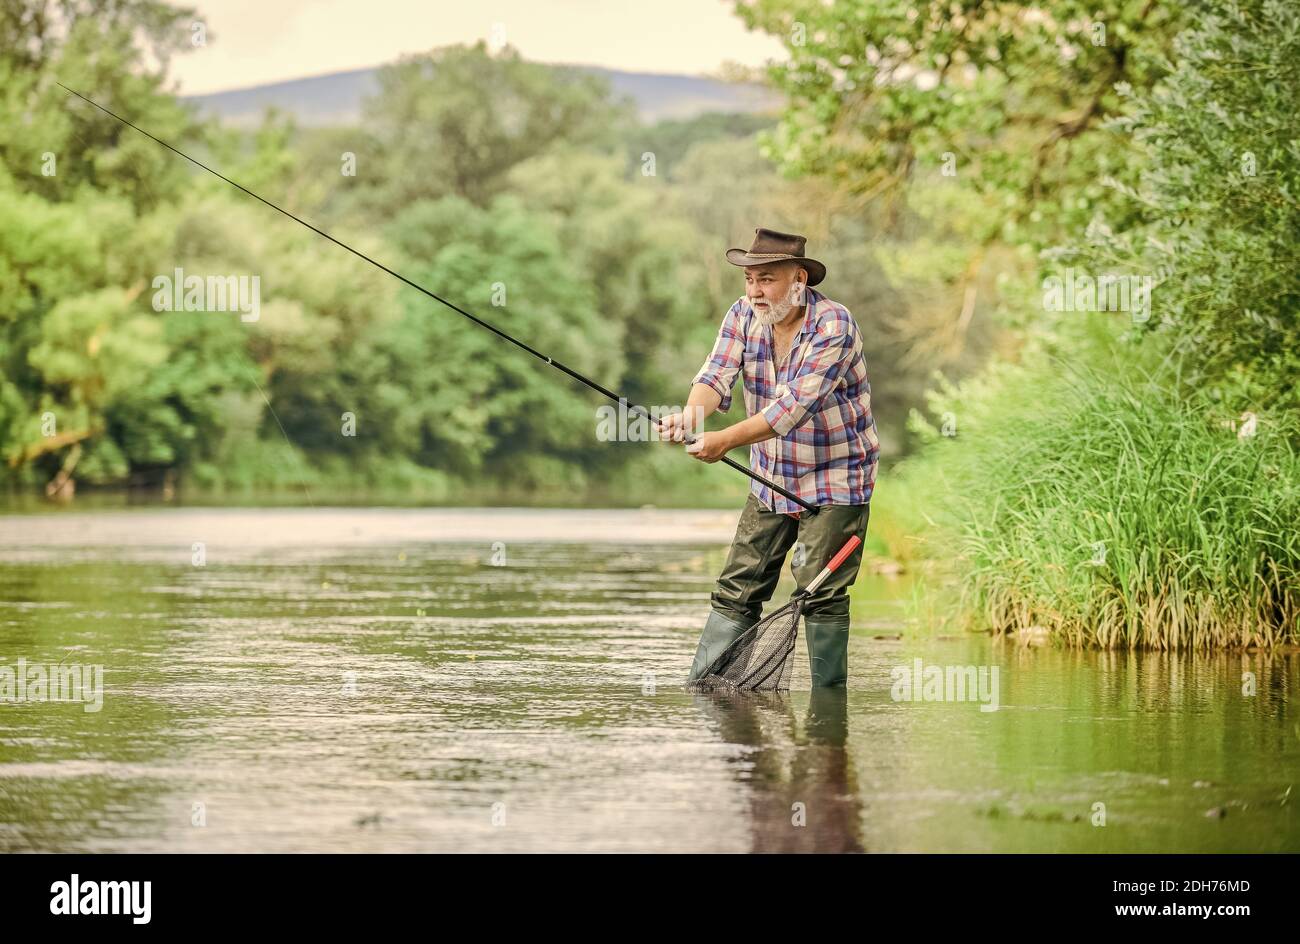 summer weekend. Big game fishing. man fly fishing. man catching fish. hobby  and sport activity. pothunter. retired bearded fisher. Trout bait. fisherman  with fishing rod. Men and fish are alike Stock Photo 